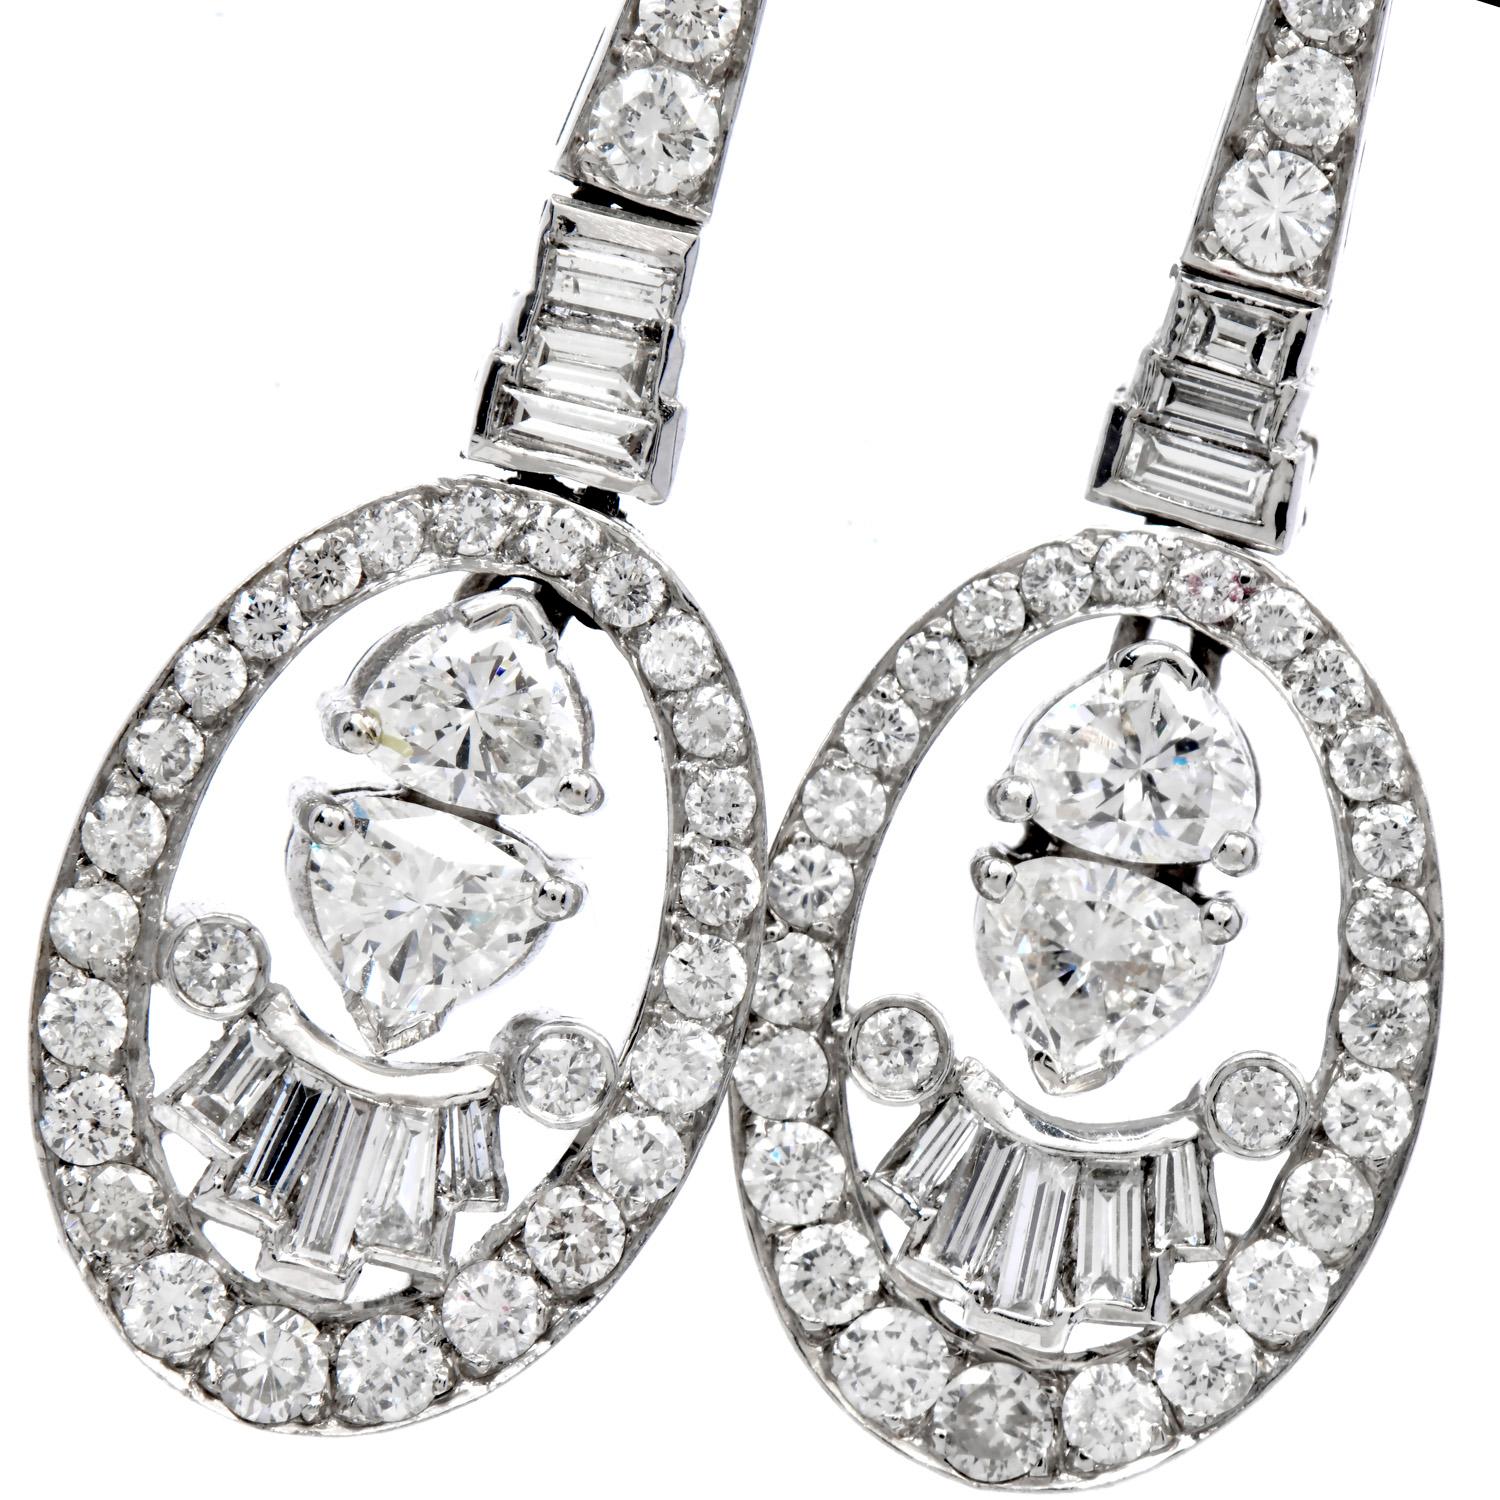 Elegance and movement on these Dangle Drop Earrings!
These 1990's pieces are centered by 4 Trillion-cut Genuine diamonds, the top is adorned by 2 Marquise-cut Genuine diamonds and 16 baguette-cut  Prong Set and Chanel set, weighing 3.00 carats in